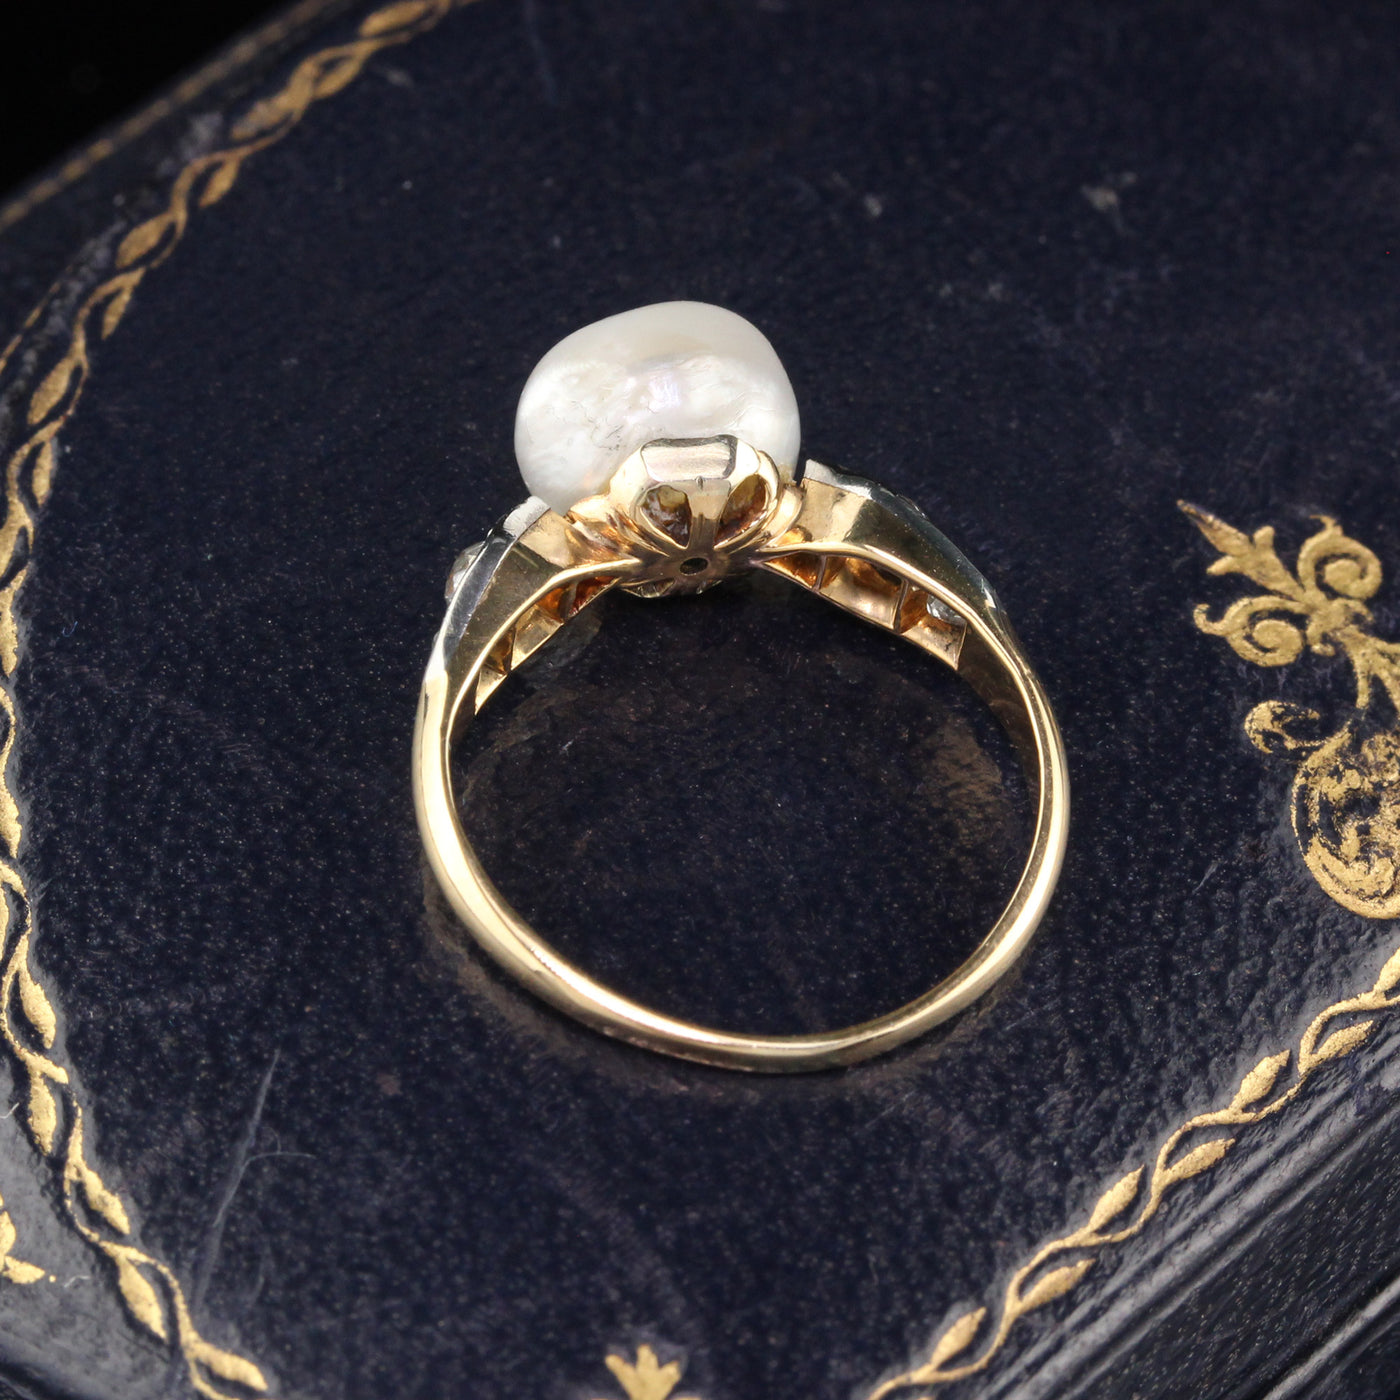 Antique Edwardian Yellow Gold  Natural Pearl & Diamond Engagement Ring